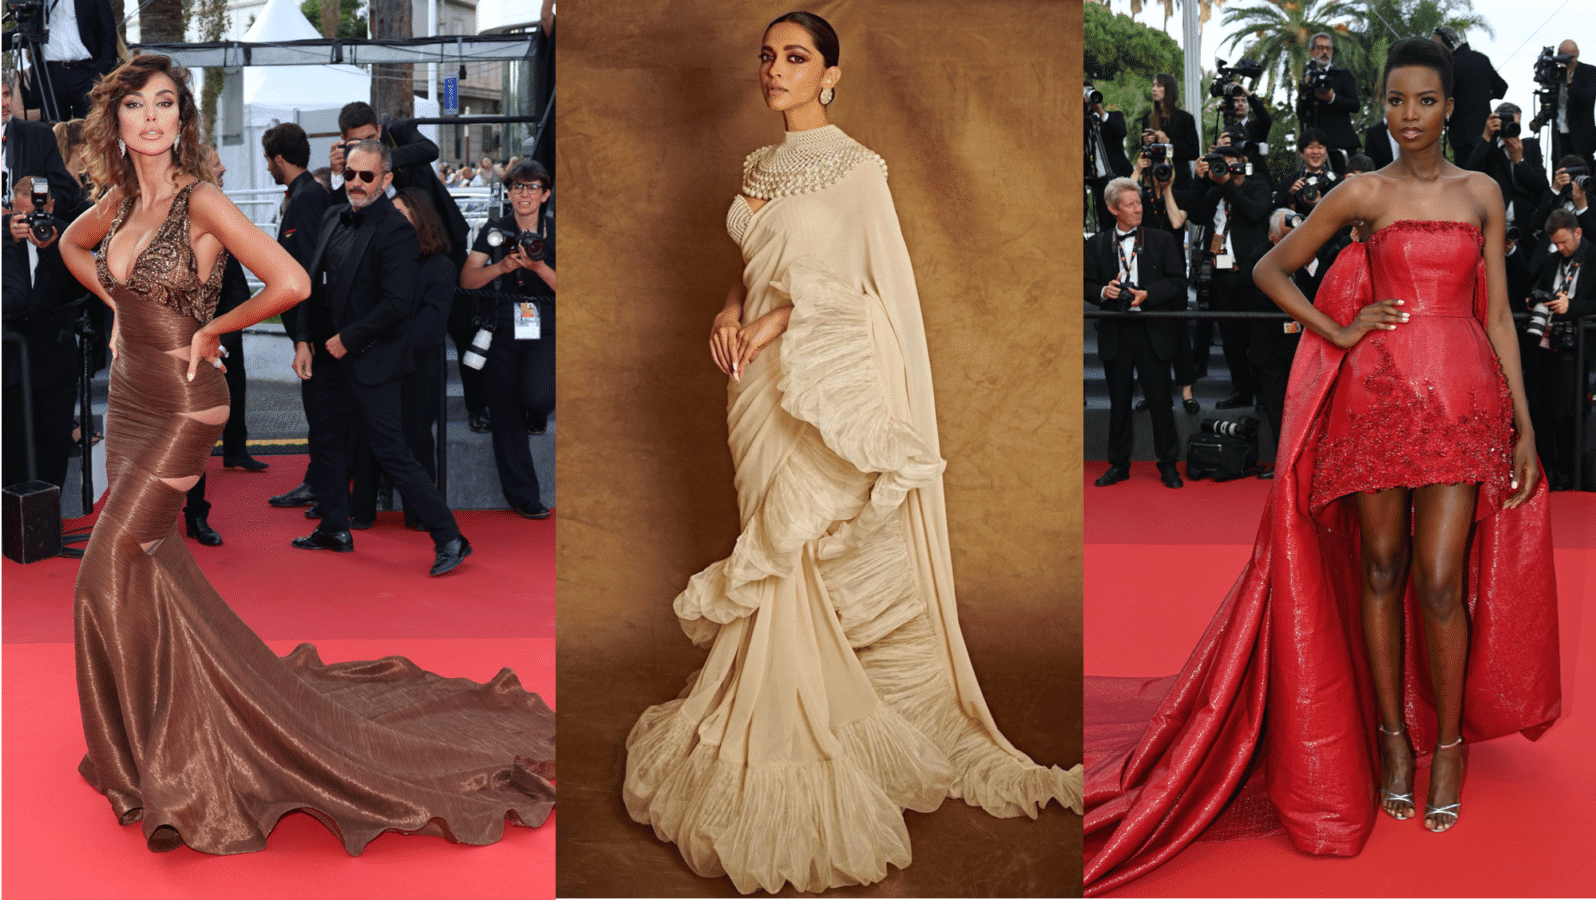 Cannes Film Festival 2022: The best red carpet fashion looks